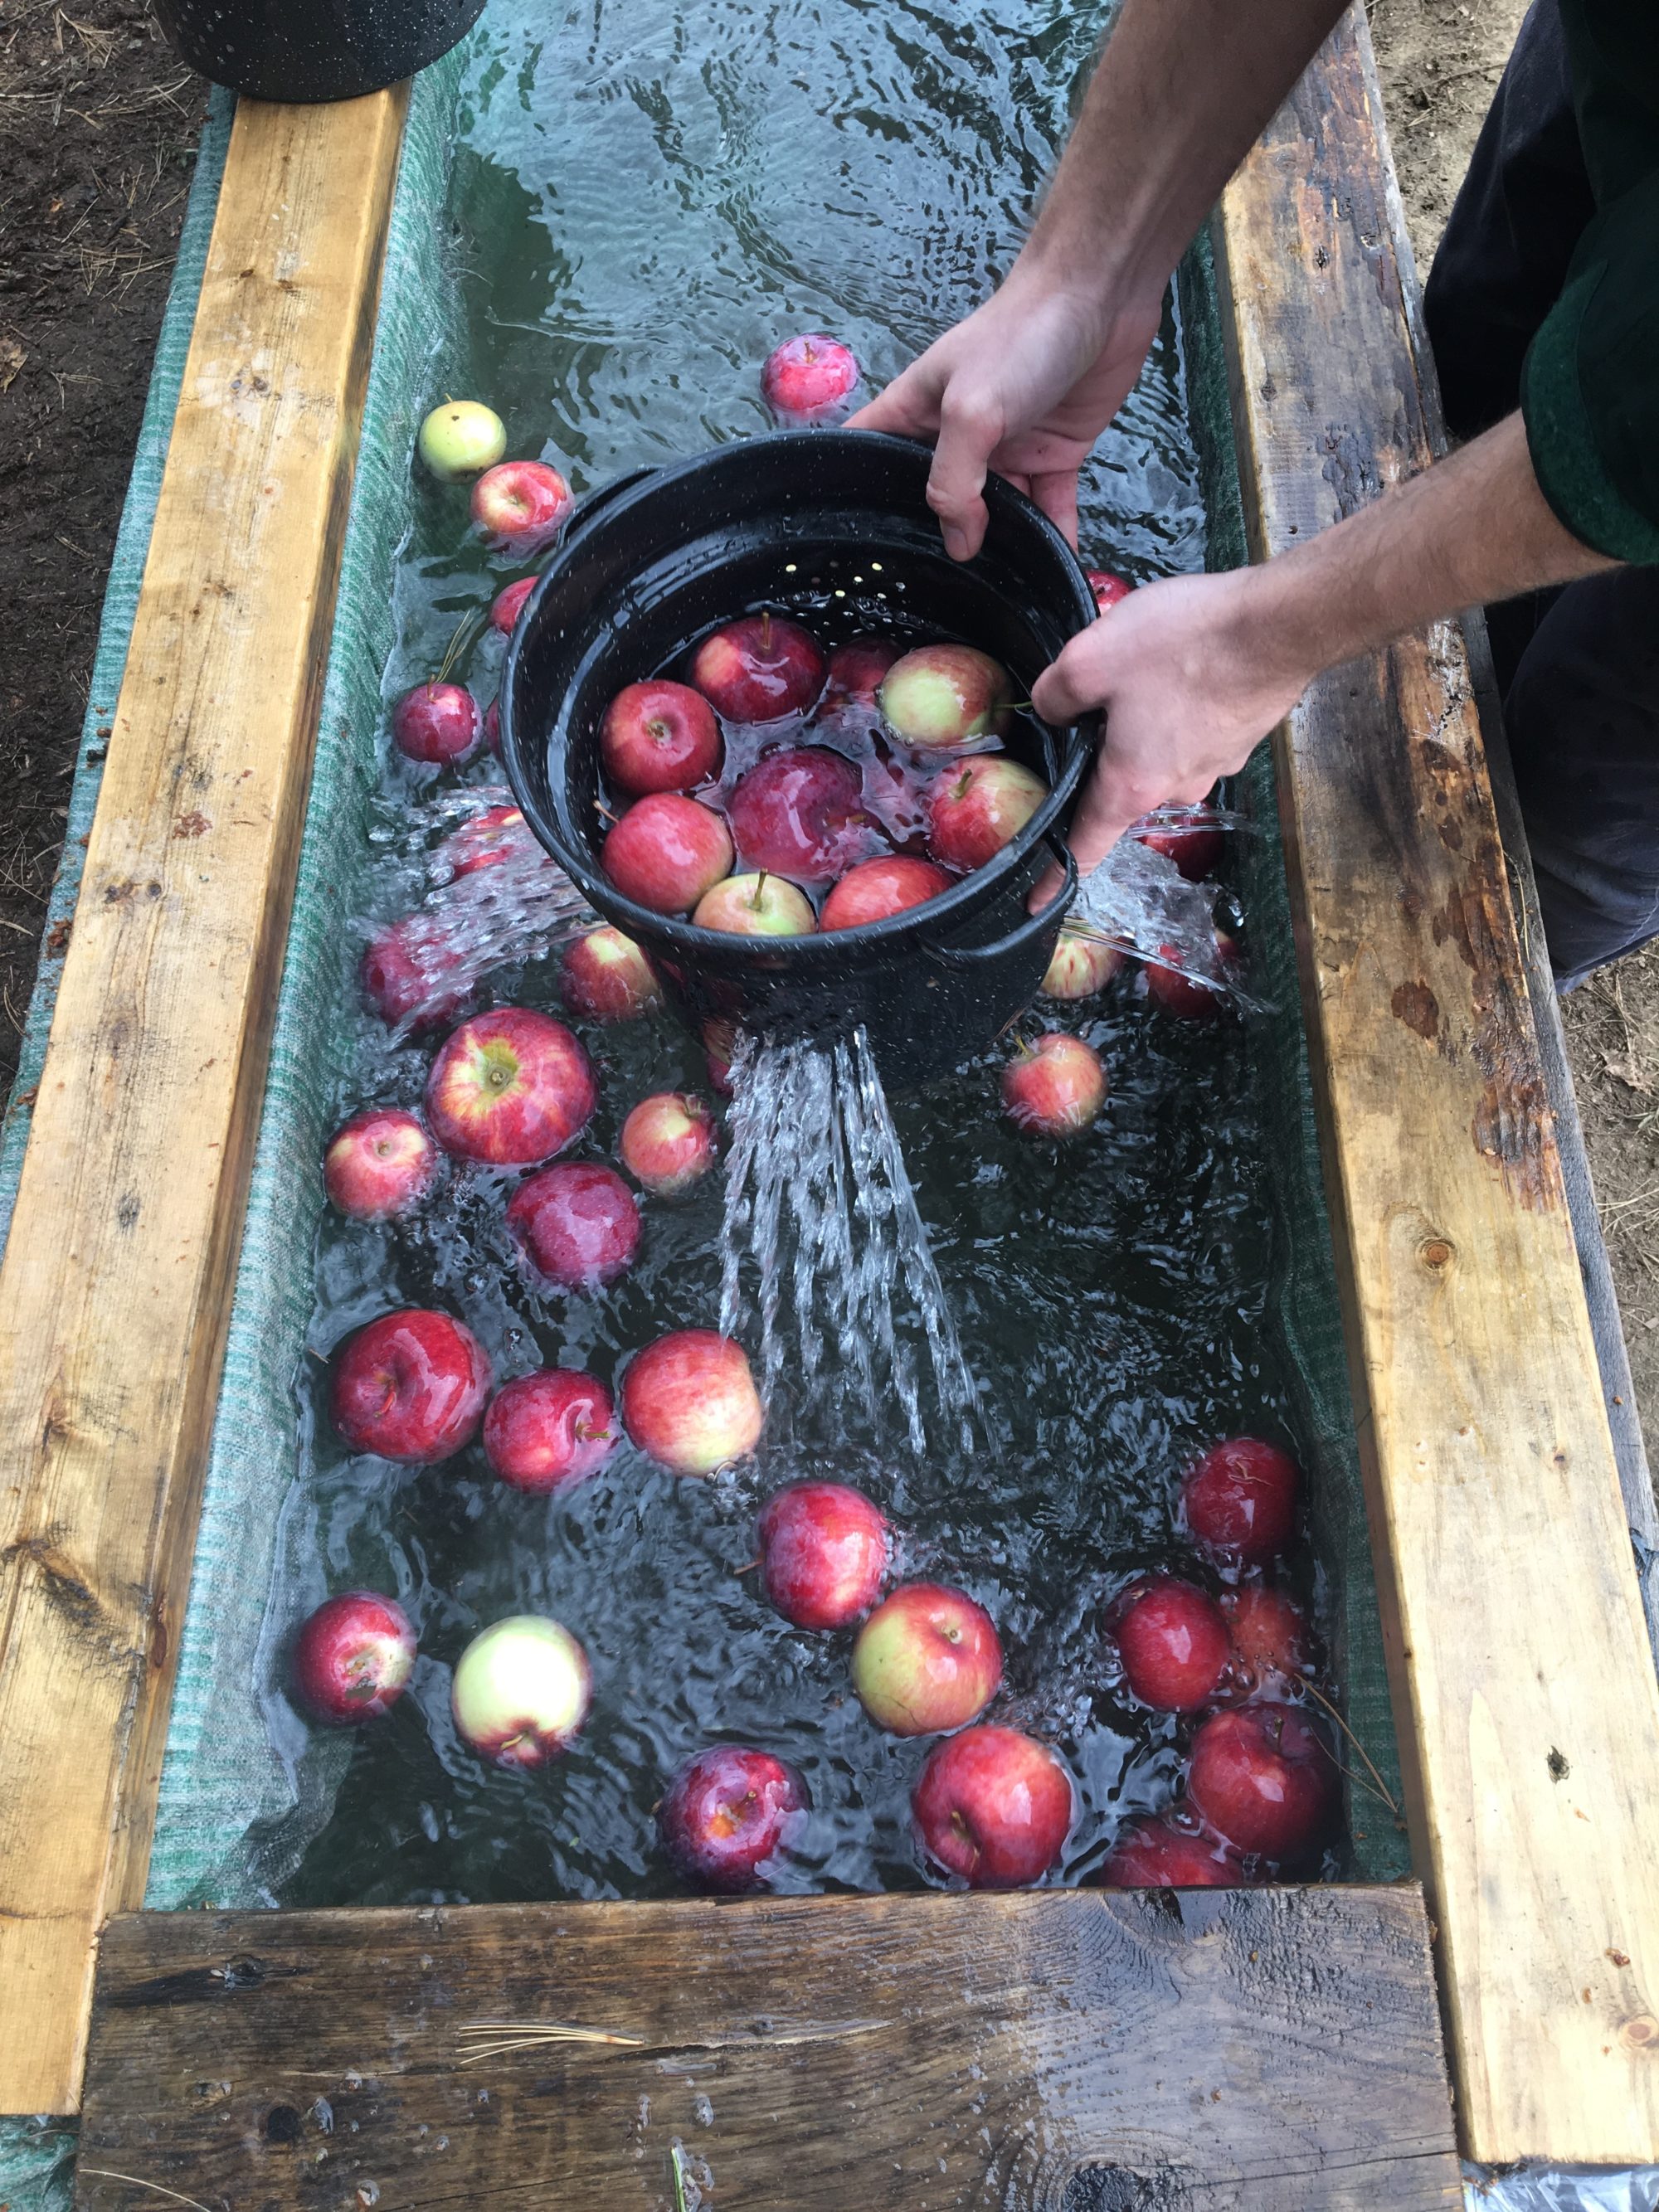 Apples being washed and prepped for cidering